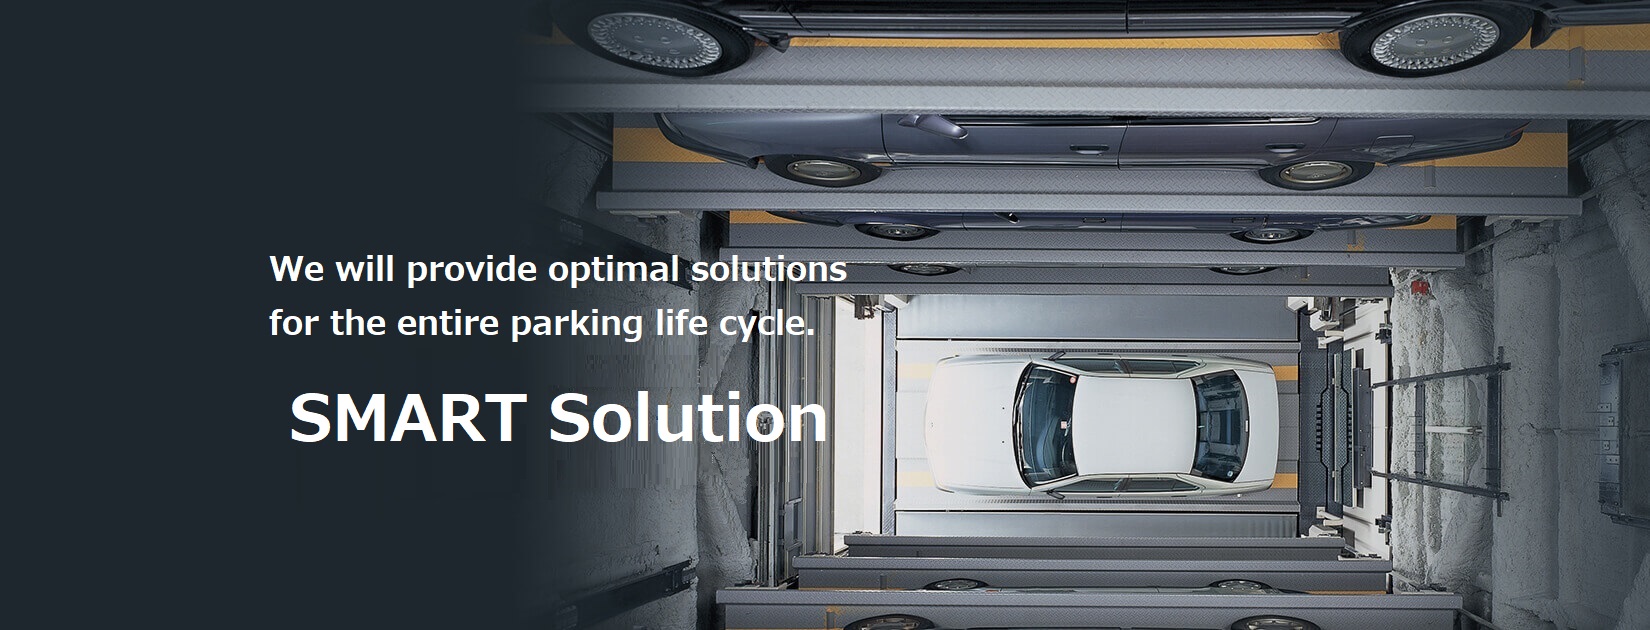 We will provide optimal solutions for the entire parking life cycle